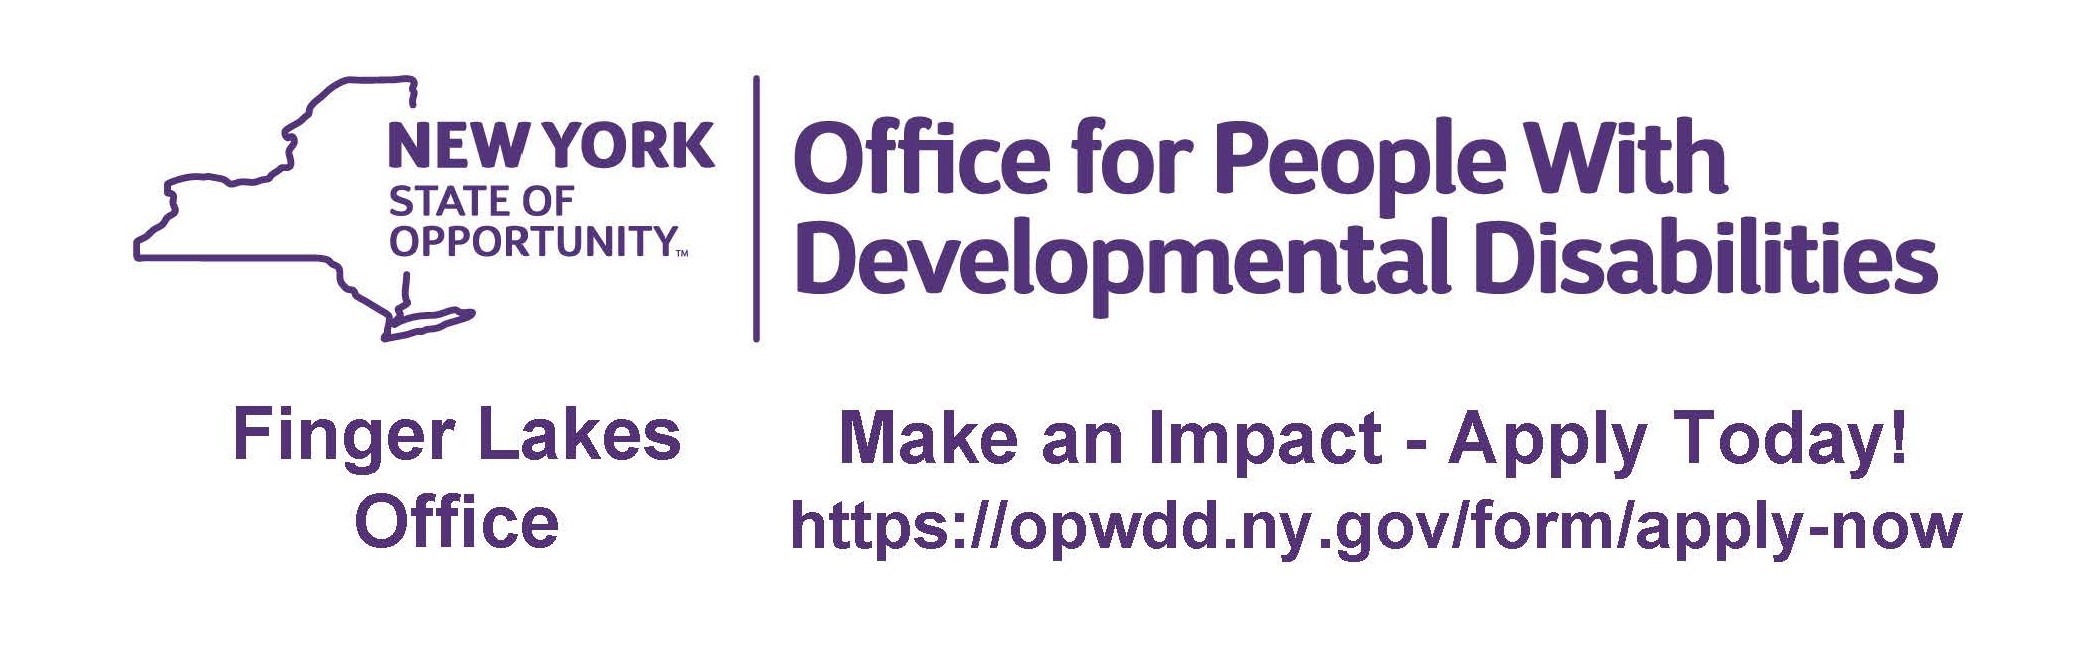 OPWDD Logo - Finger Lakes Office_ Apply Today